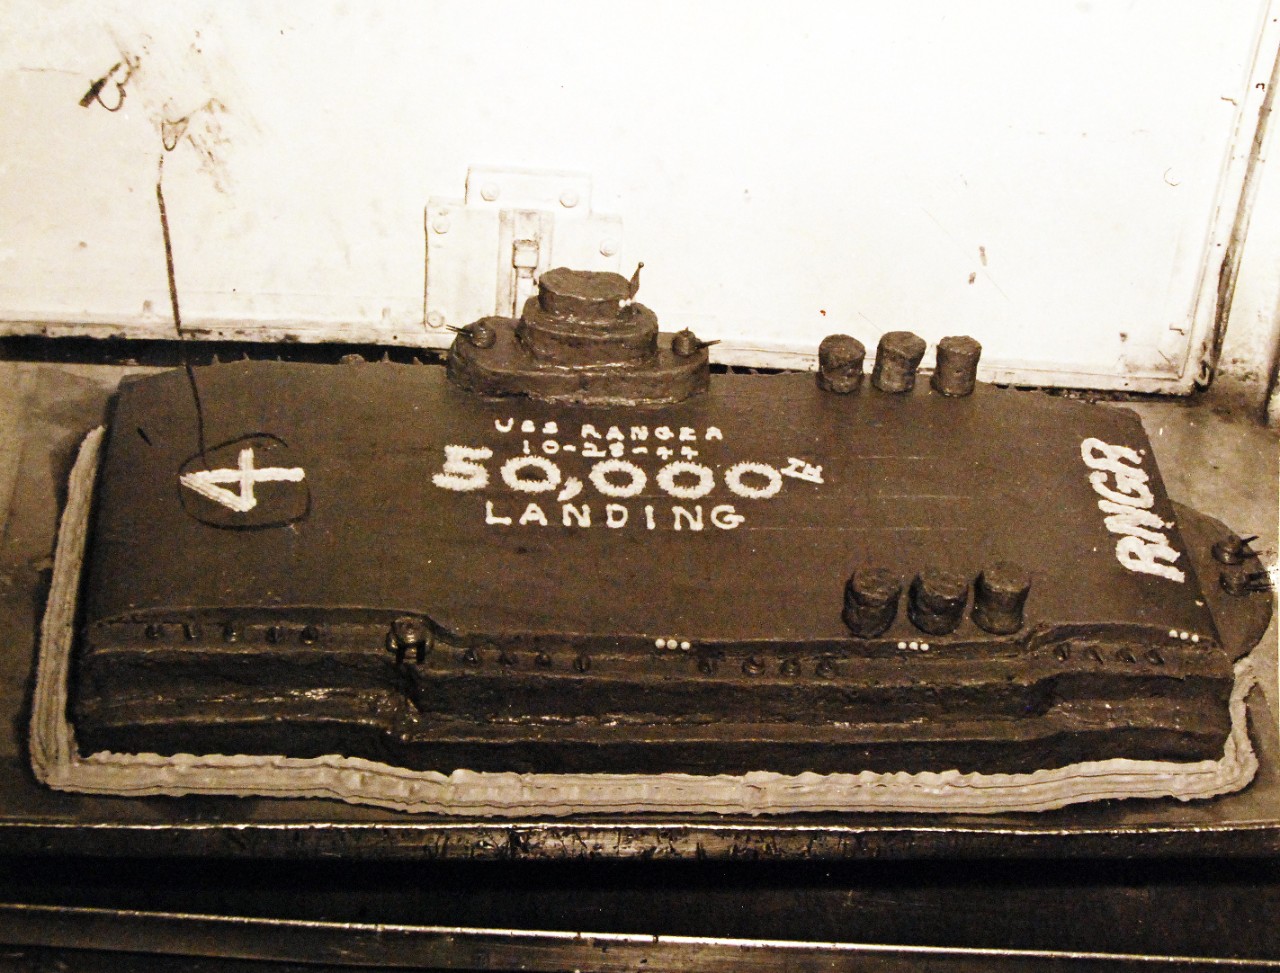 80-G-299187:  USS Ranger (CV 4),  1944.   cake in honor of the 50,000 landing onboard.  Cake was baked by BKR1/C J. Ponsell. Photograph released October 8, 1944.  U.S. Navy photograph, now in the collections of the National Archives.  (2015/12/15).